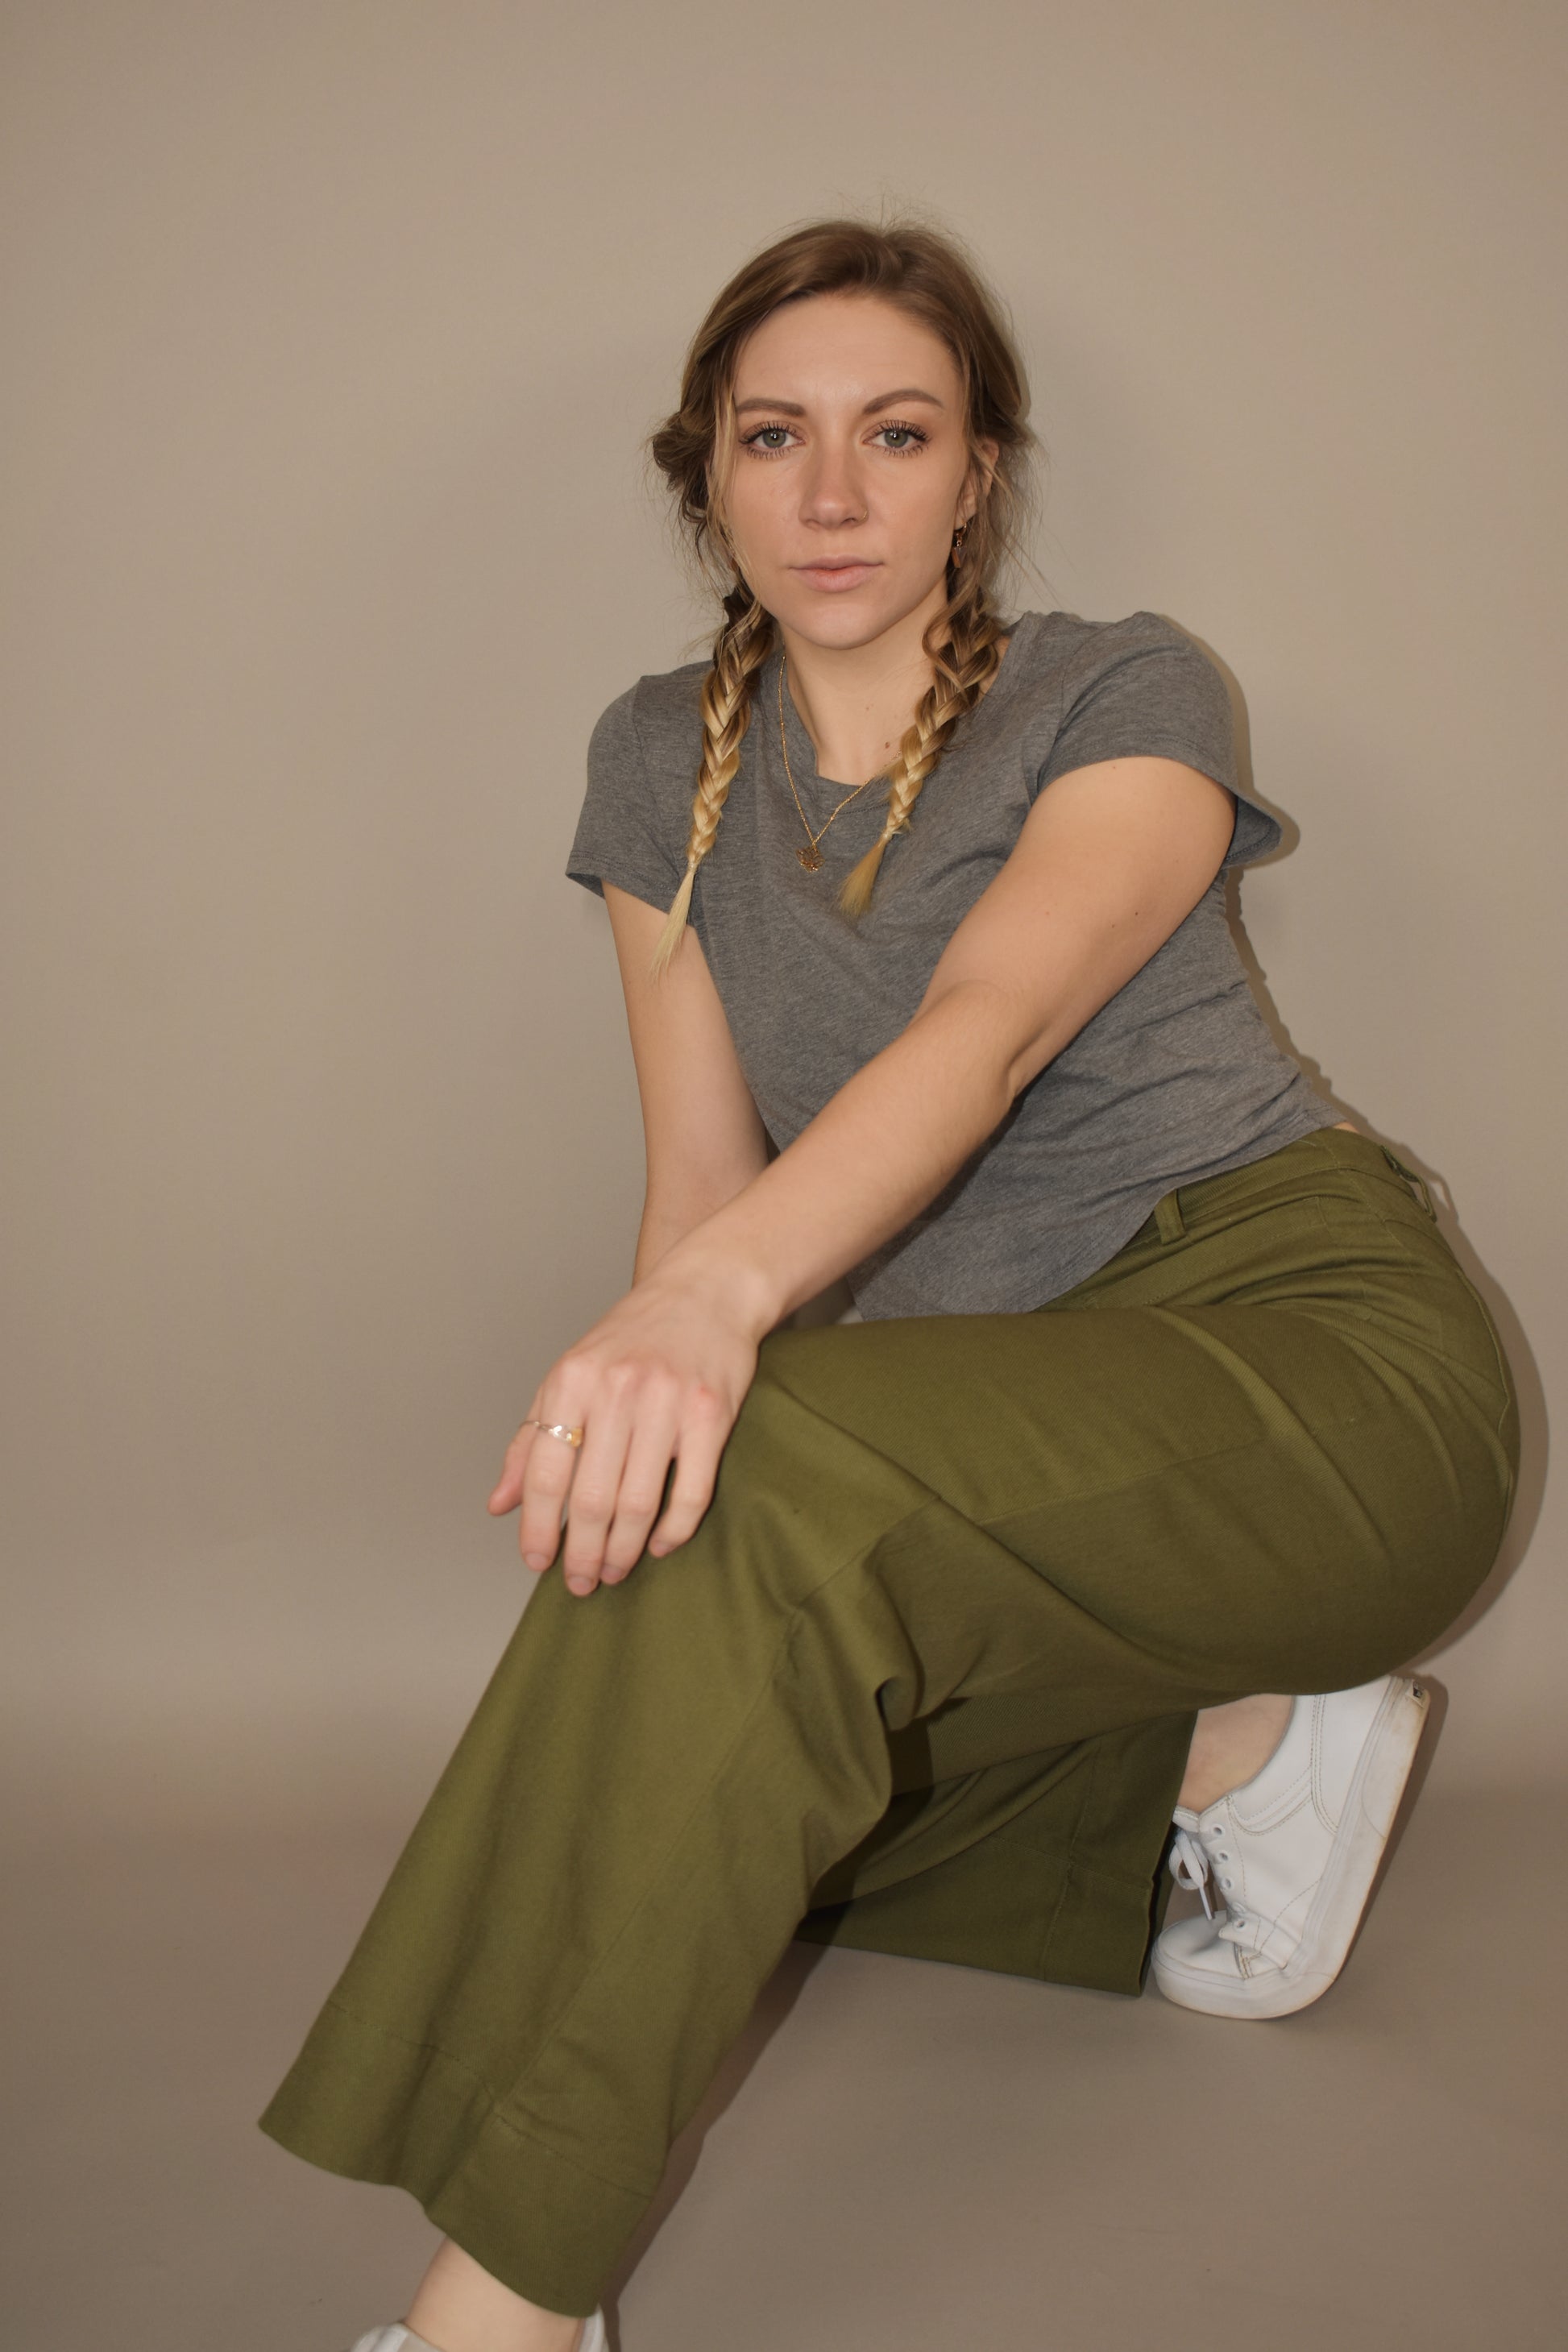 wide leg full length stretchy olive denim pants with brown front button. retro patch pockets on front and has back pockets too. no holes. high waisted.